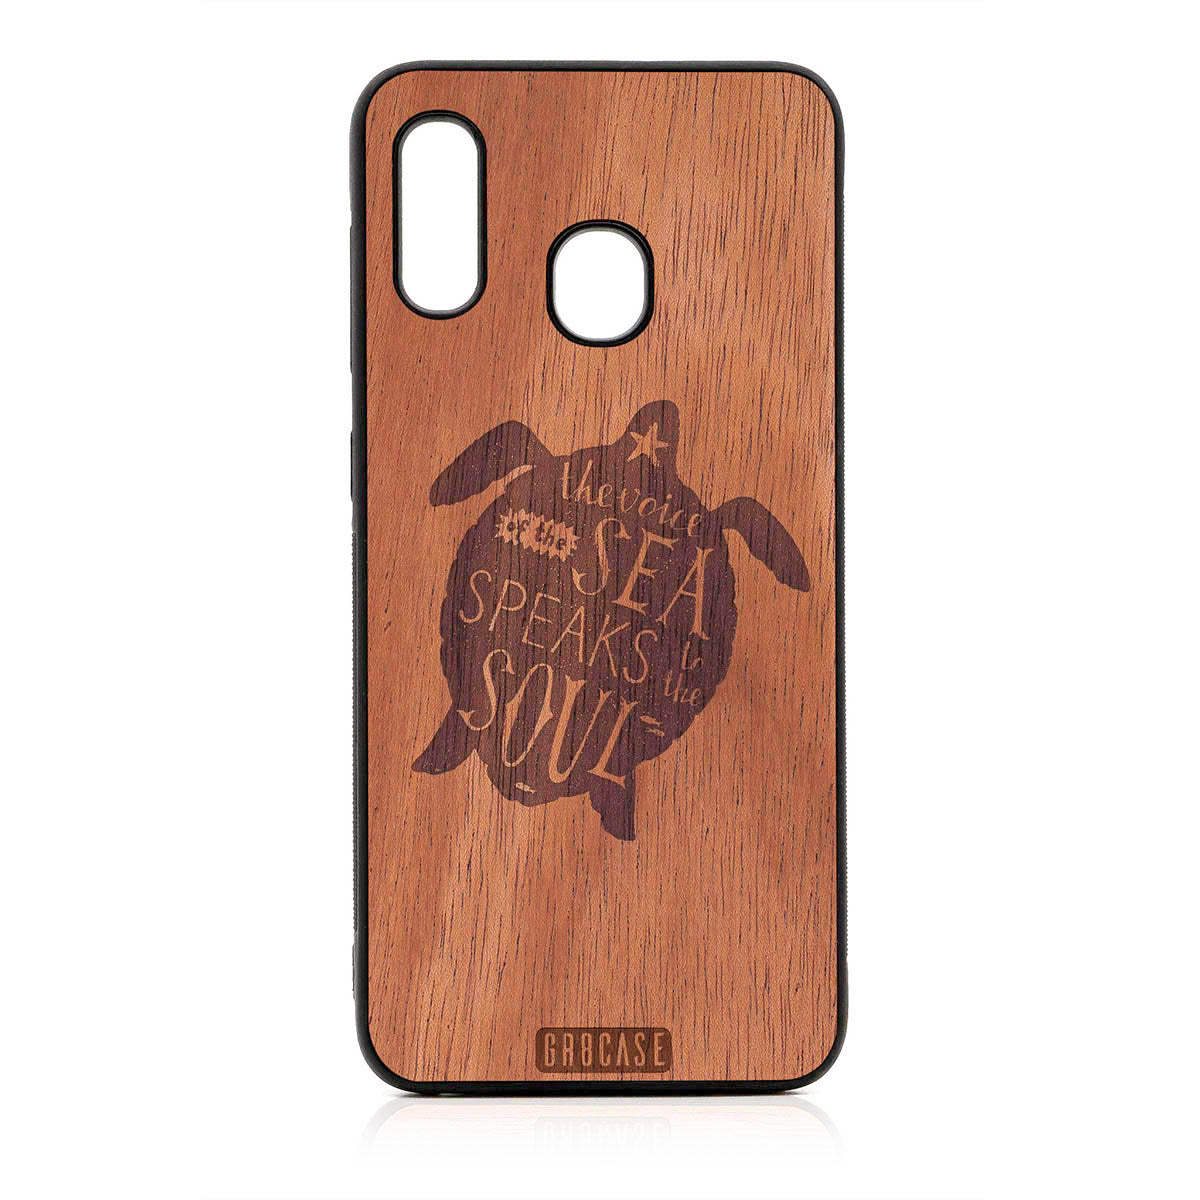 The Voice Of The Sea Speaks To The Soul (Turtle) Design Wood Case For Samsung Galaxy A20